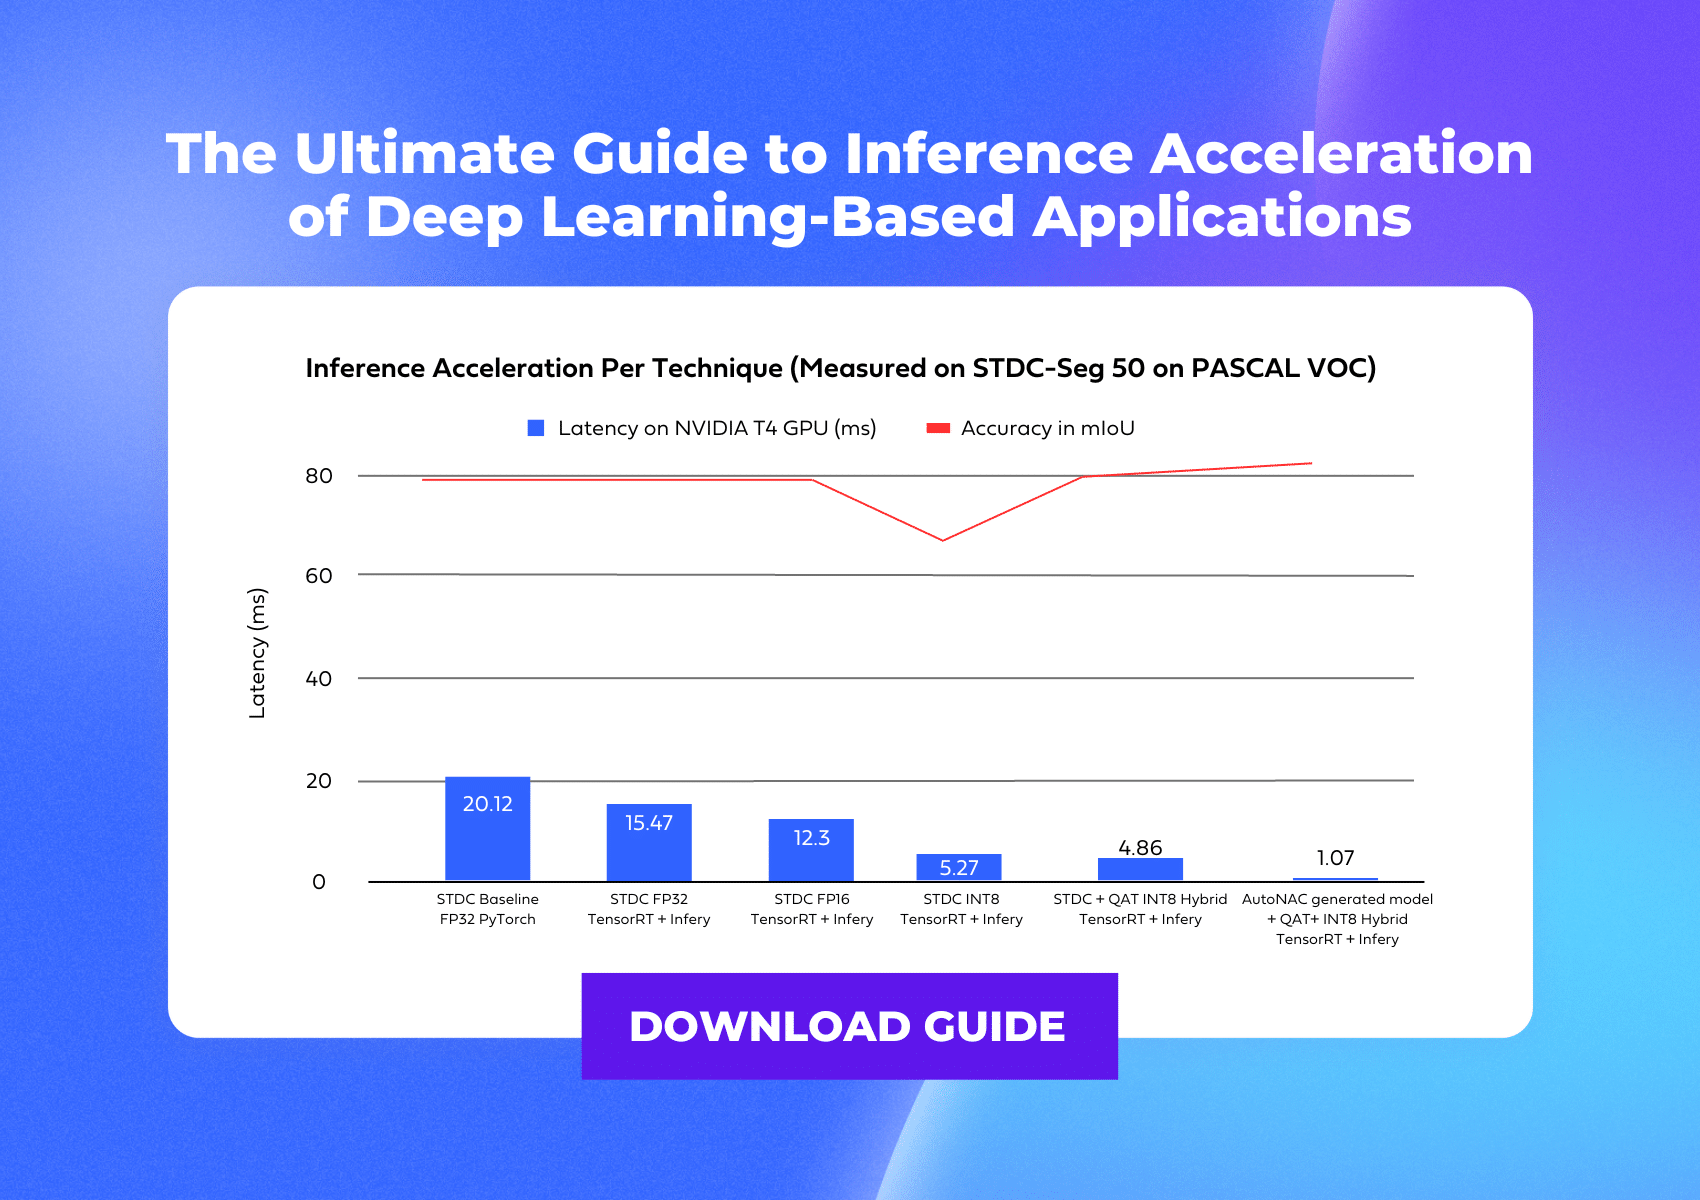 deci-inference-acceleration-guide-featured-image